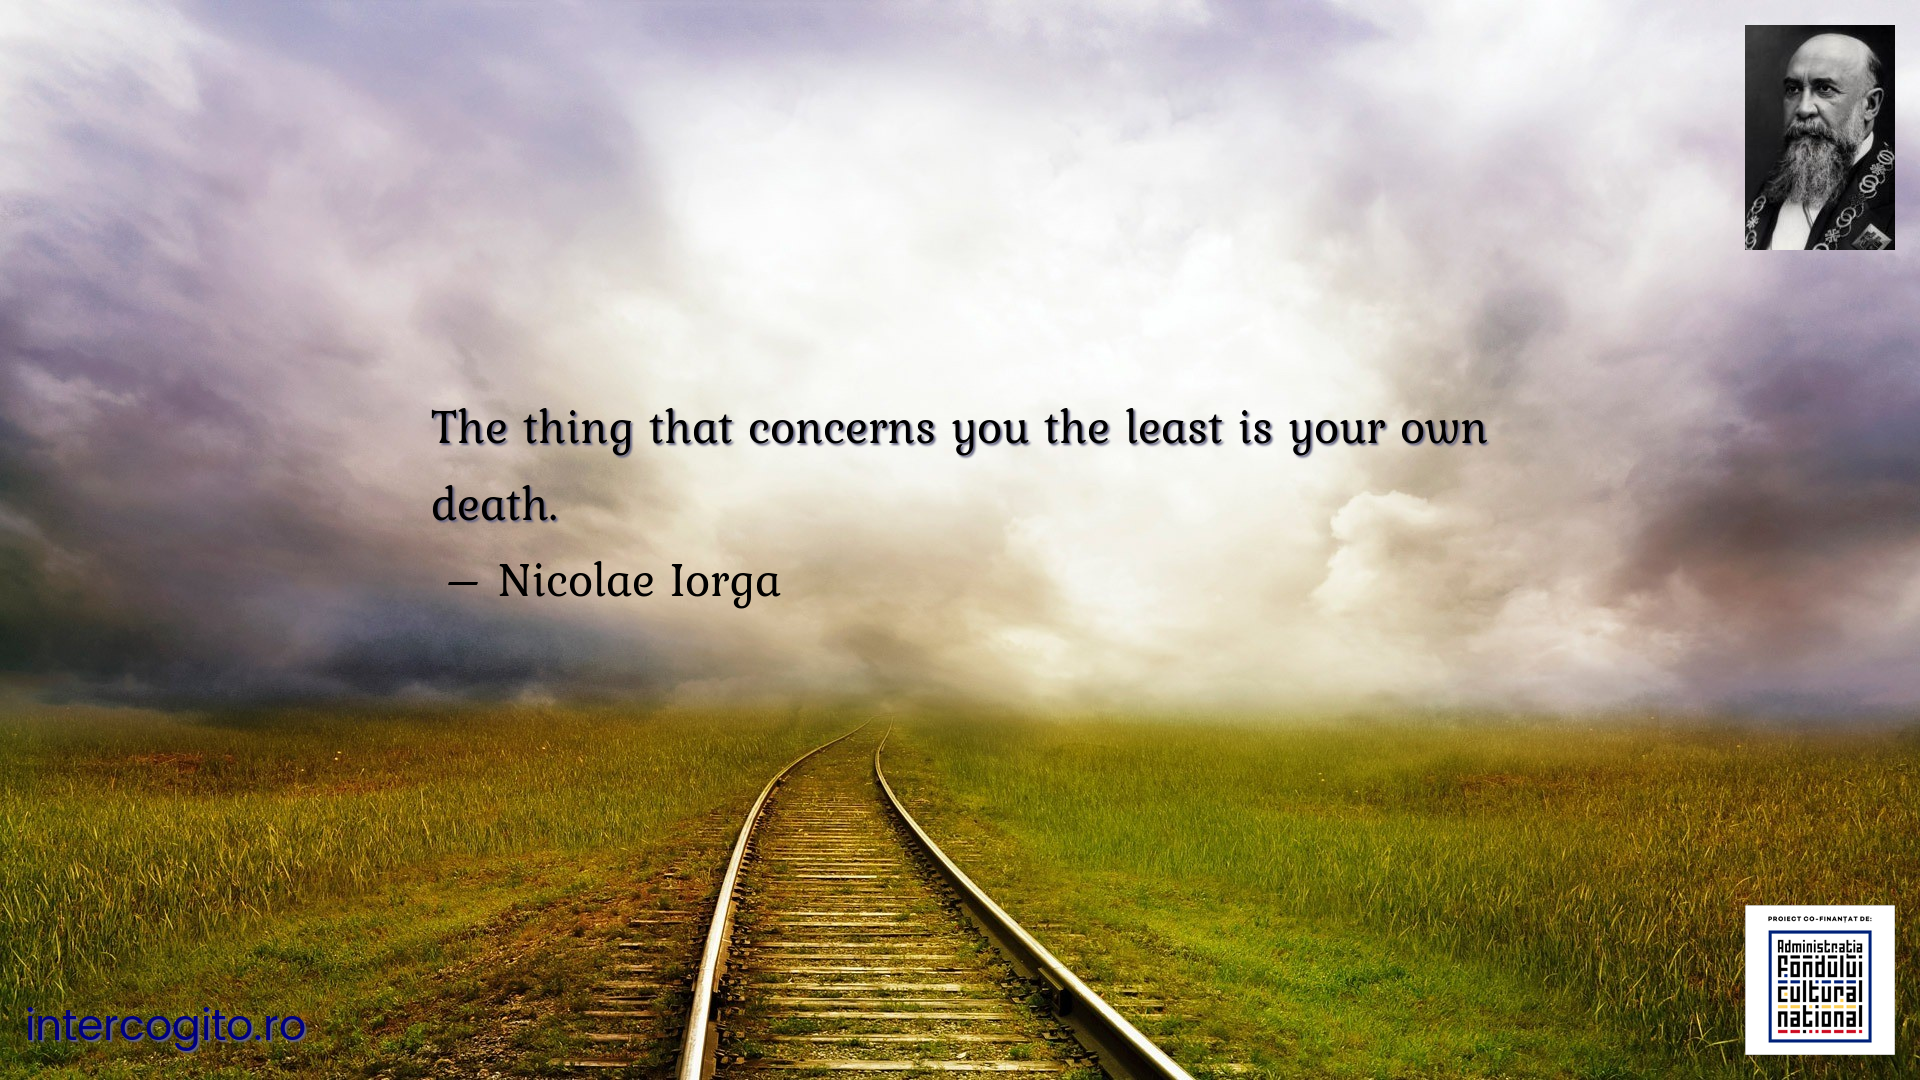 The thing that concerns you the least is your own death.